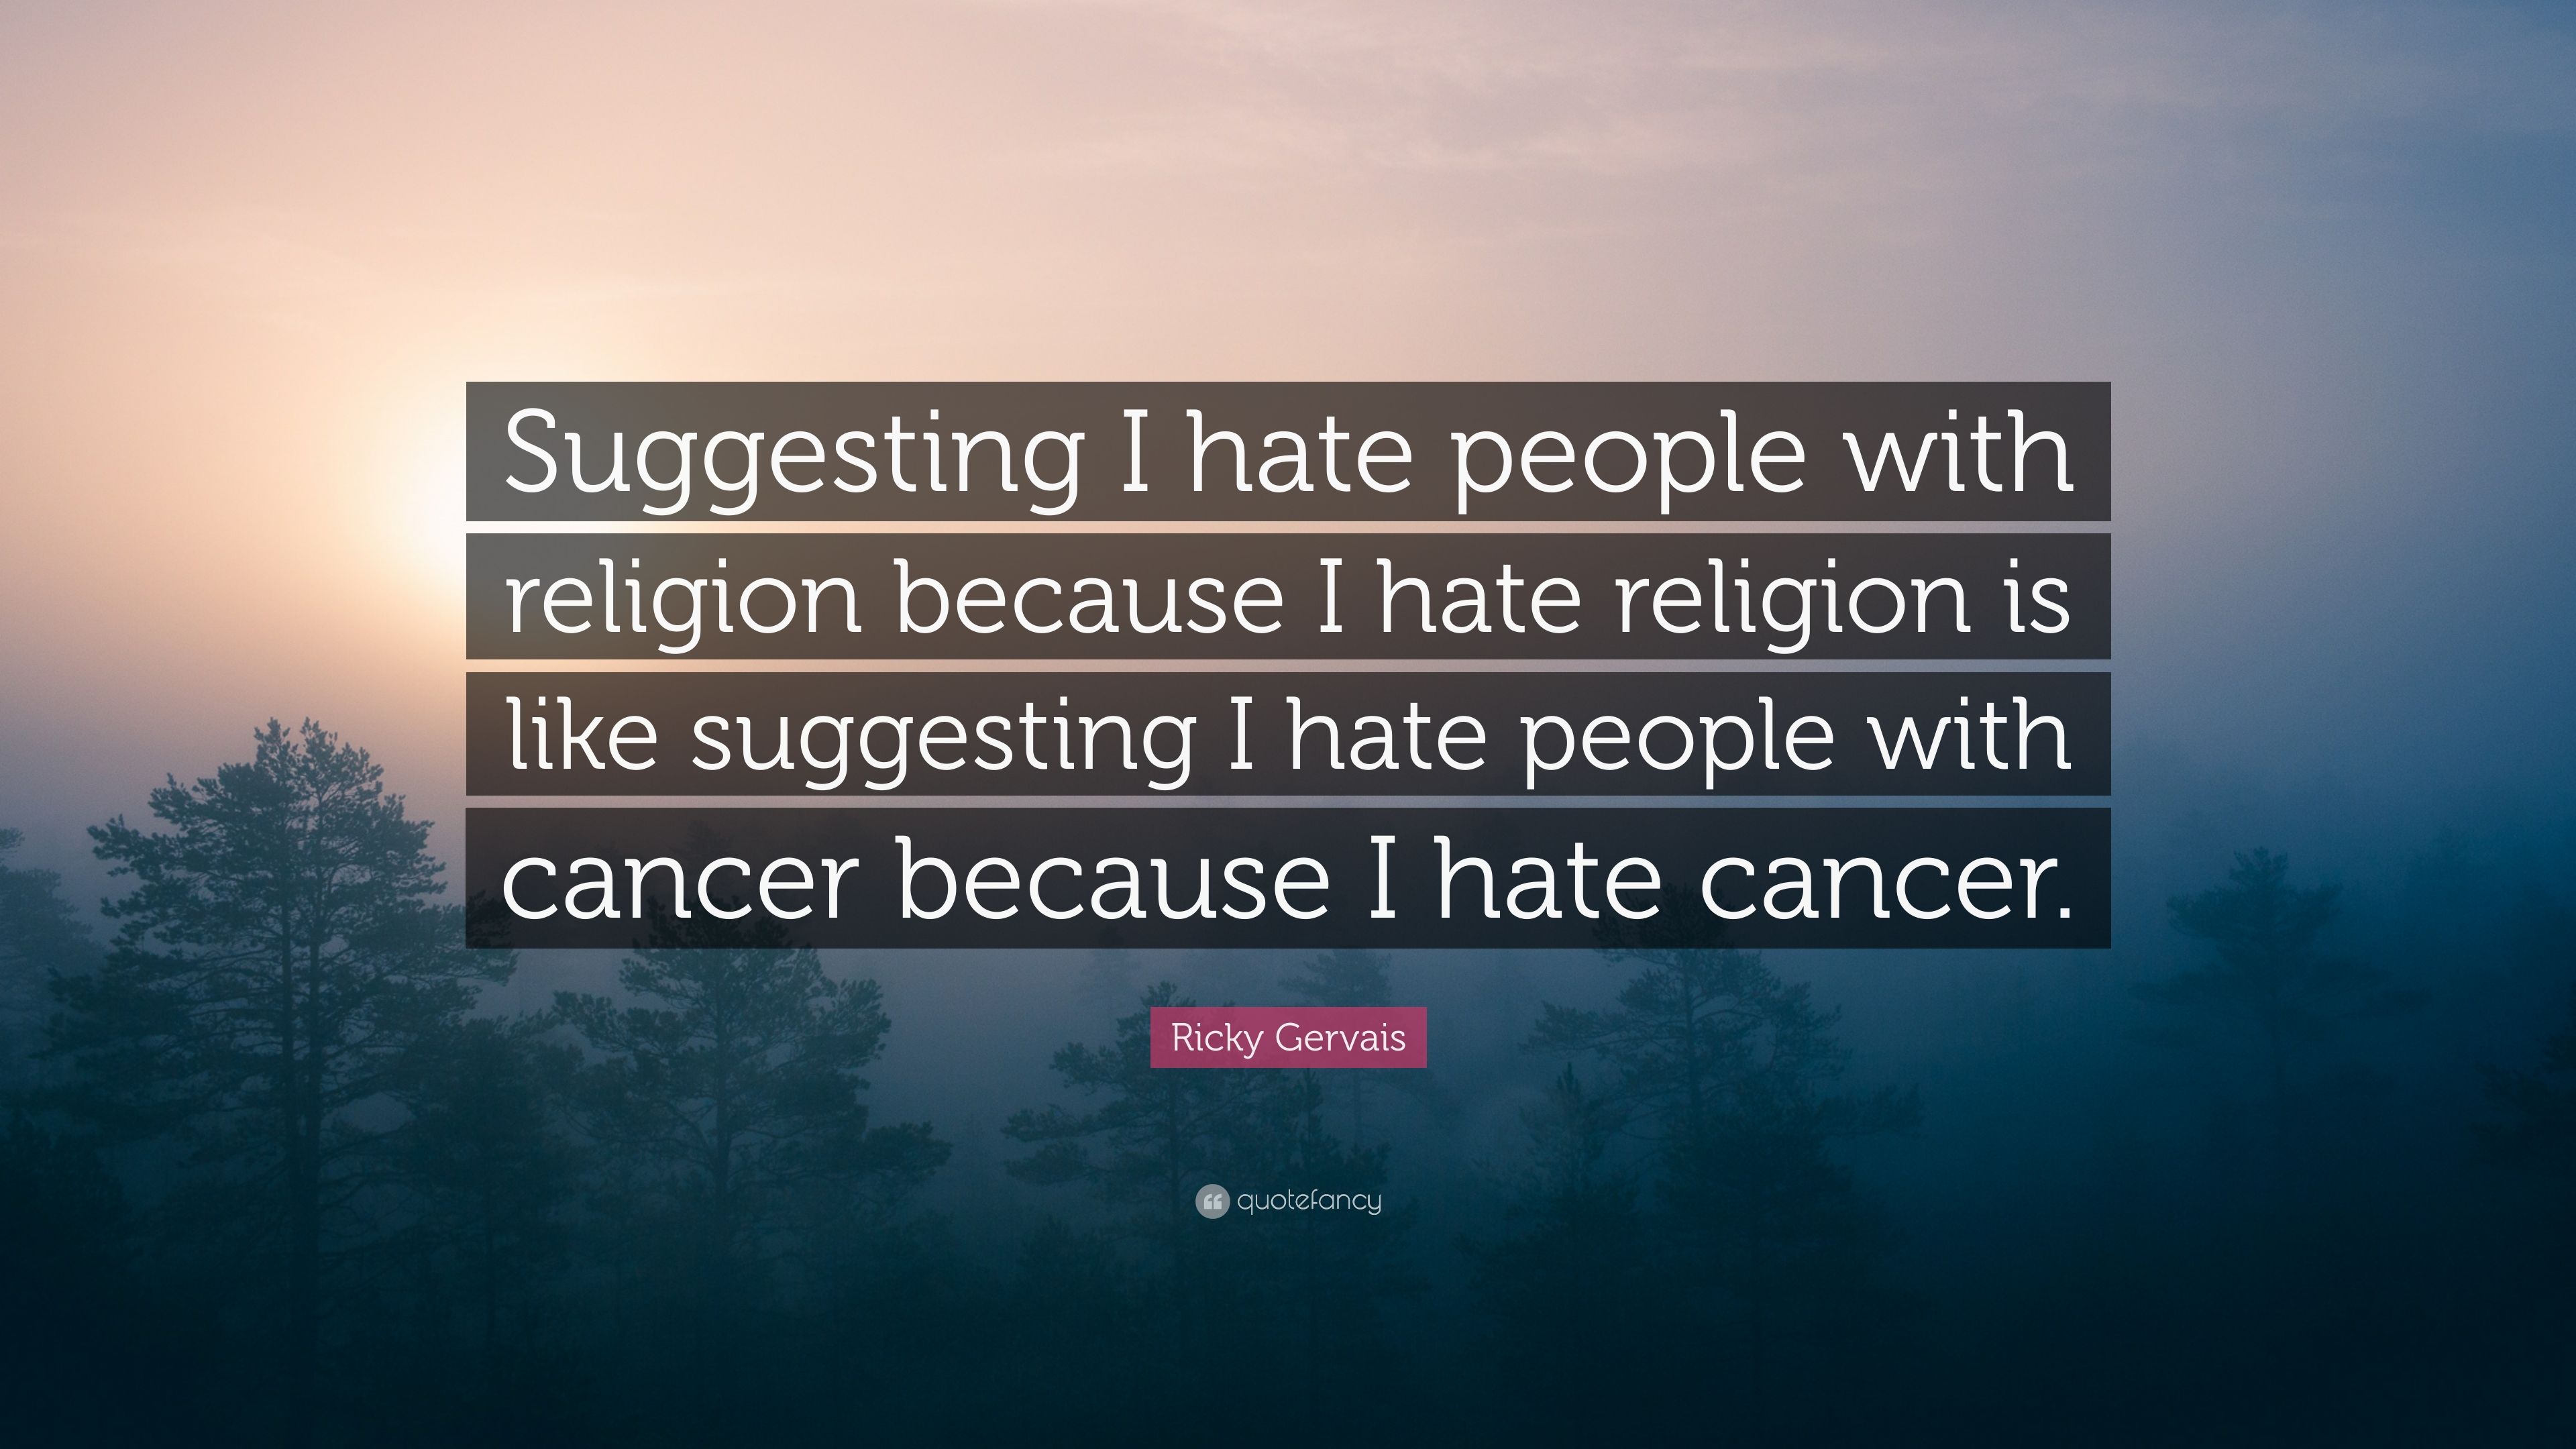 suggesting i hate people with religion because i hate religion is like suggesting i hate people with cancer because i hate cancer. ricky gervais